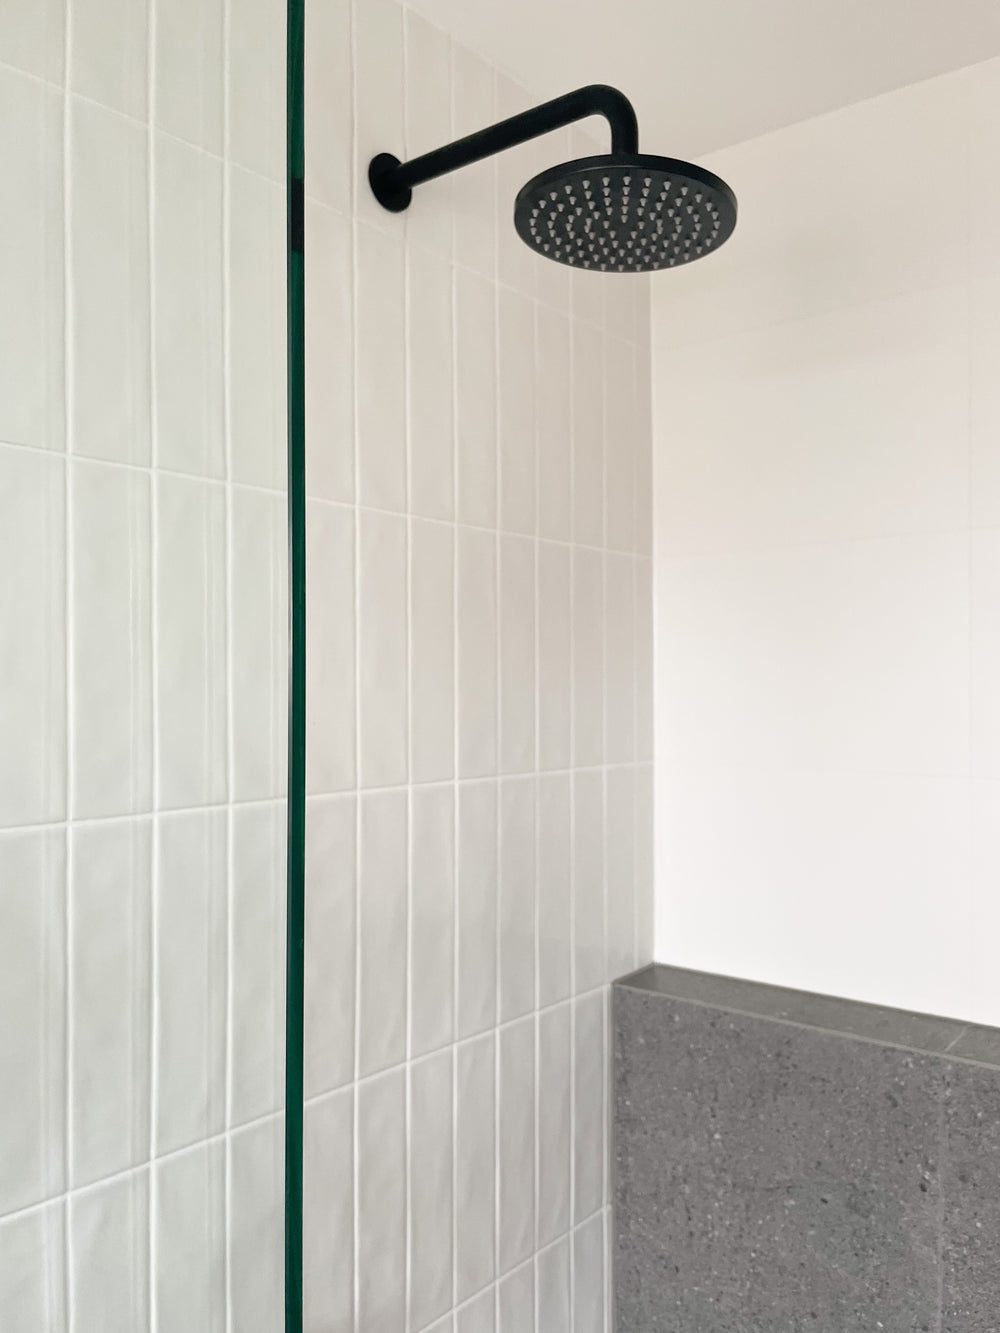 Wall Shower Arm and Head Matte Black